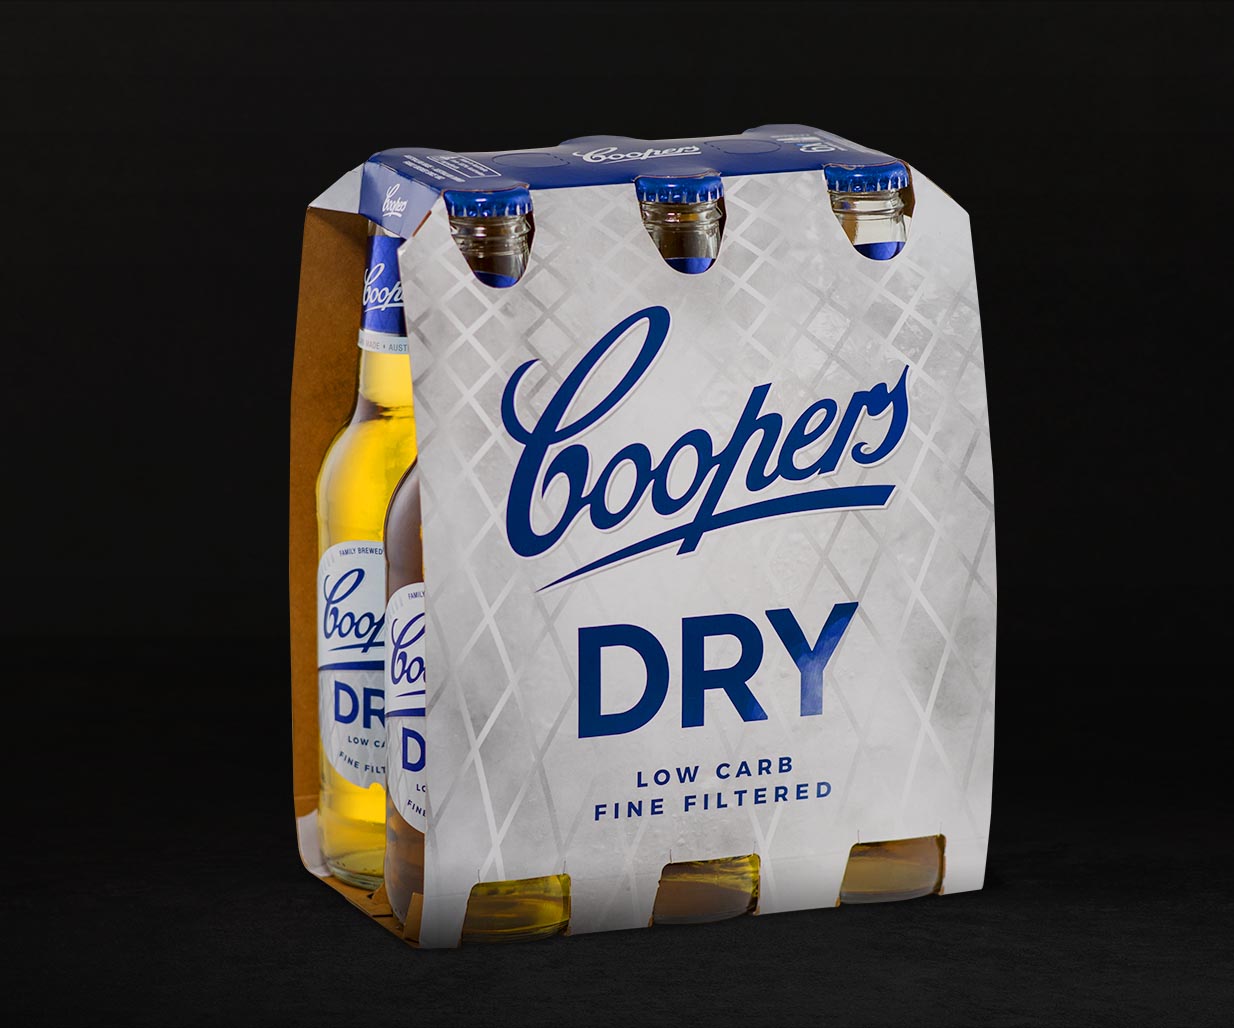 Packaging Design Sydney project for Coopers Beer Brewery by Australian packaging design agency Percept, image F